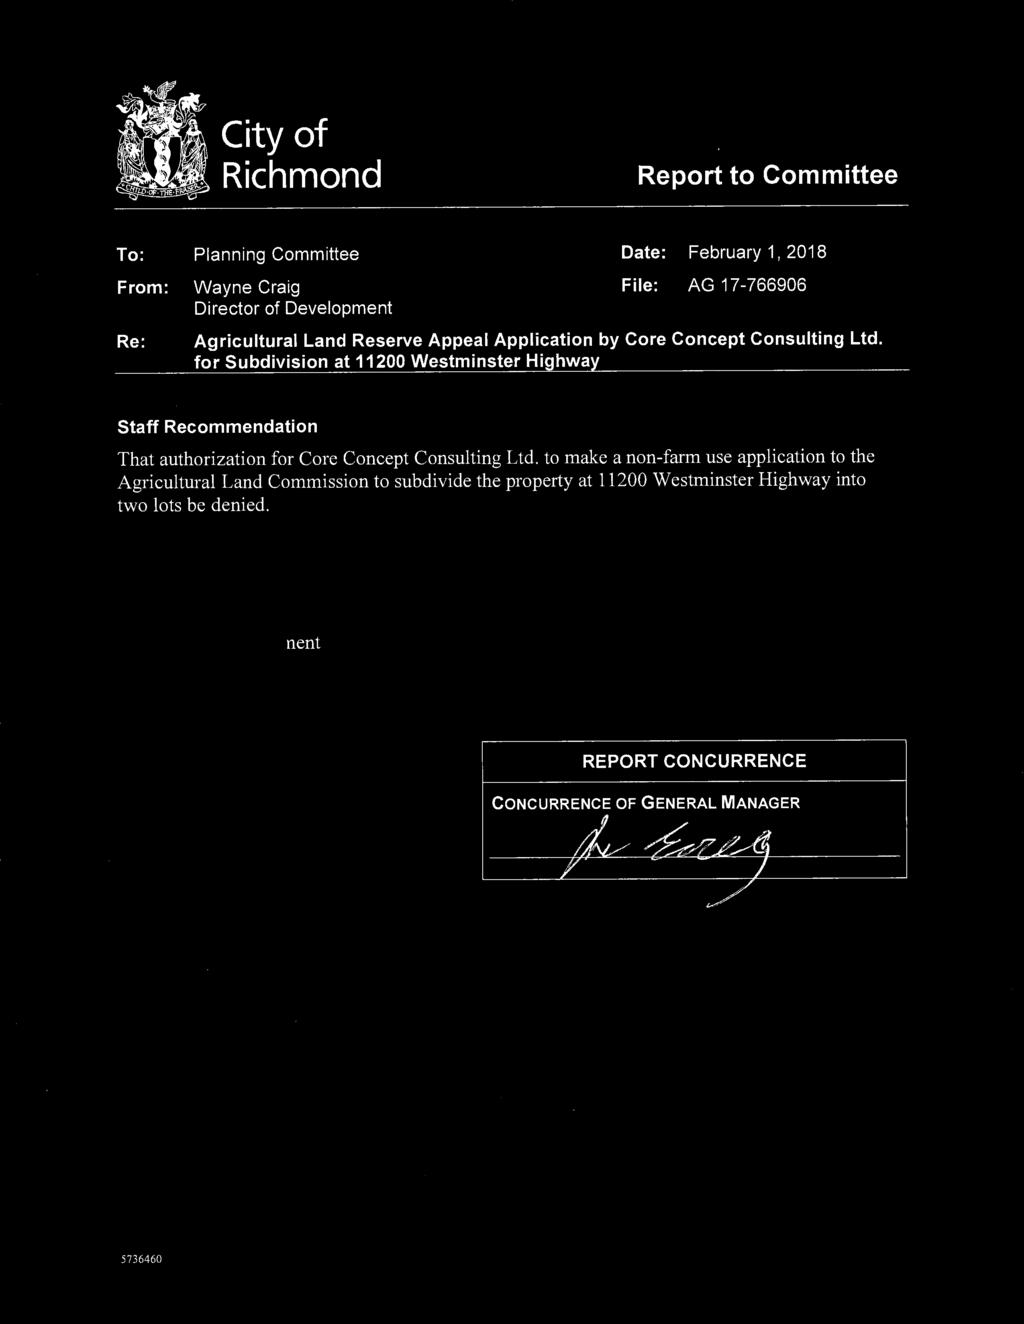 - -- -- l l 1 City of Richmond Report to Committee To: Planning Committee Date: February 1, 2018 From: Wayne Craig File: AG 17-766906 Director of Development Re: Agricultural Land Reserve Appeal